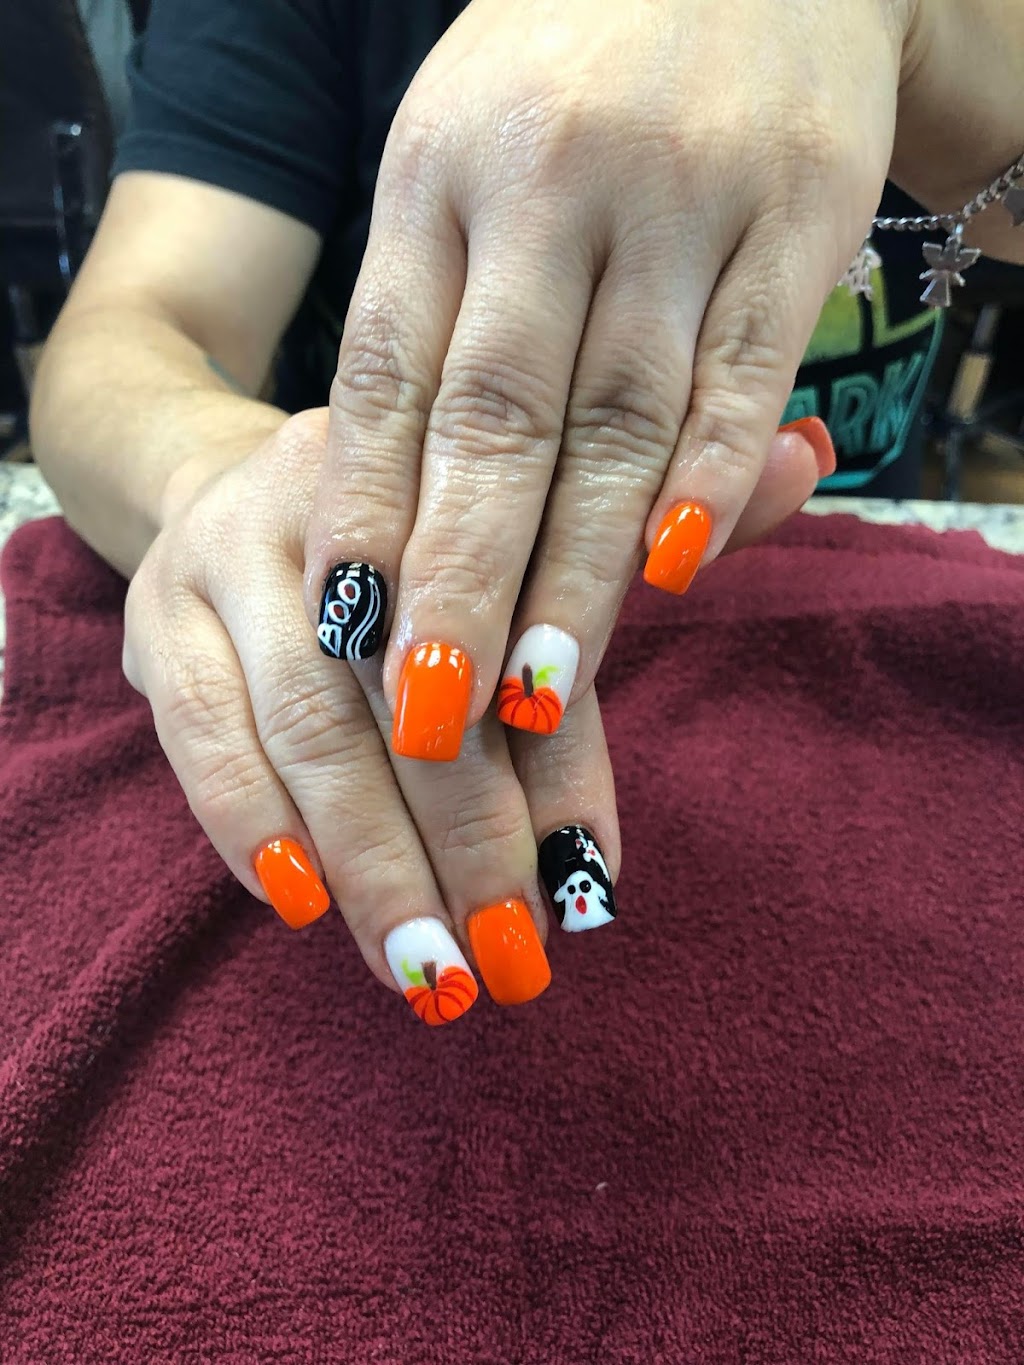 GREAT NAILS | 1512 Town Center Dr STE 650, Pflugerville, TX 78660, USA | Phone: (512) 251-4447